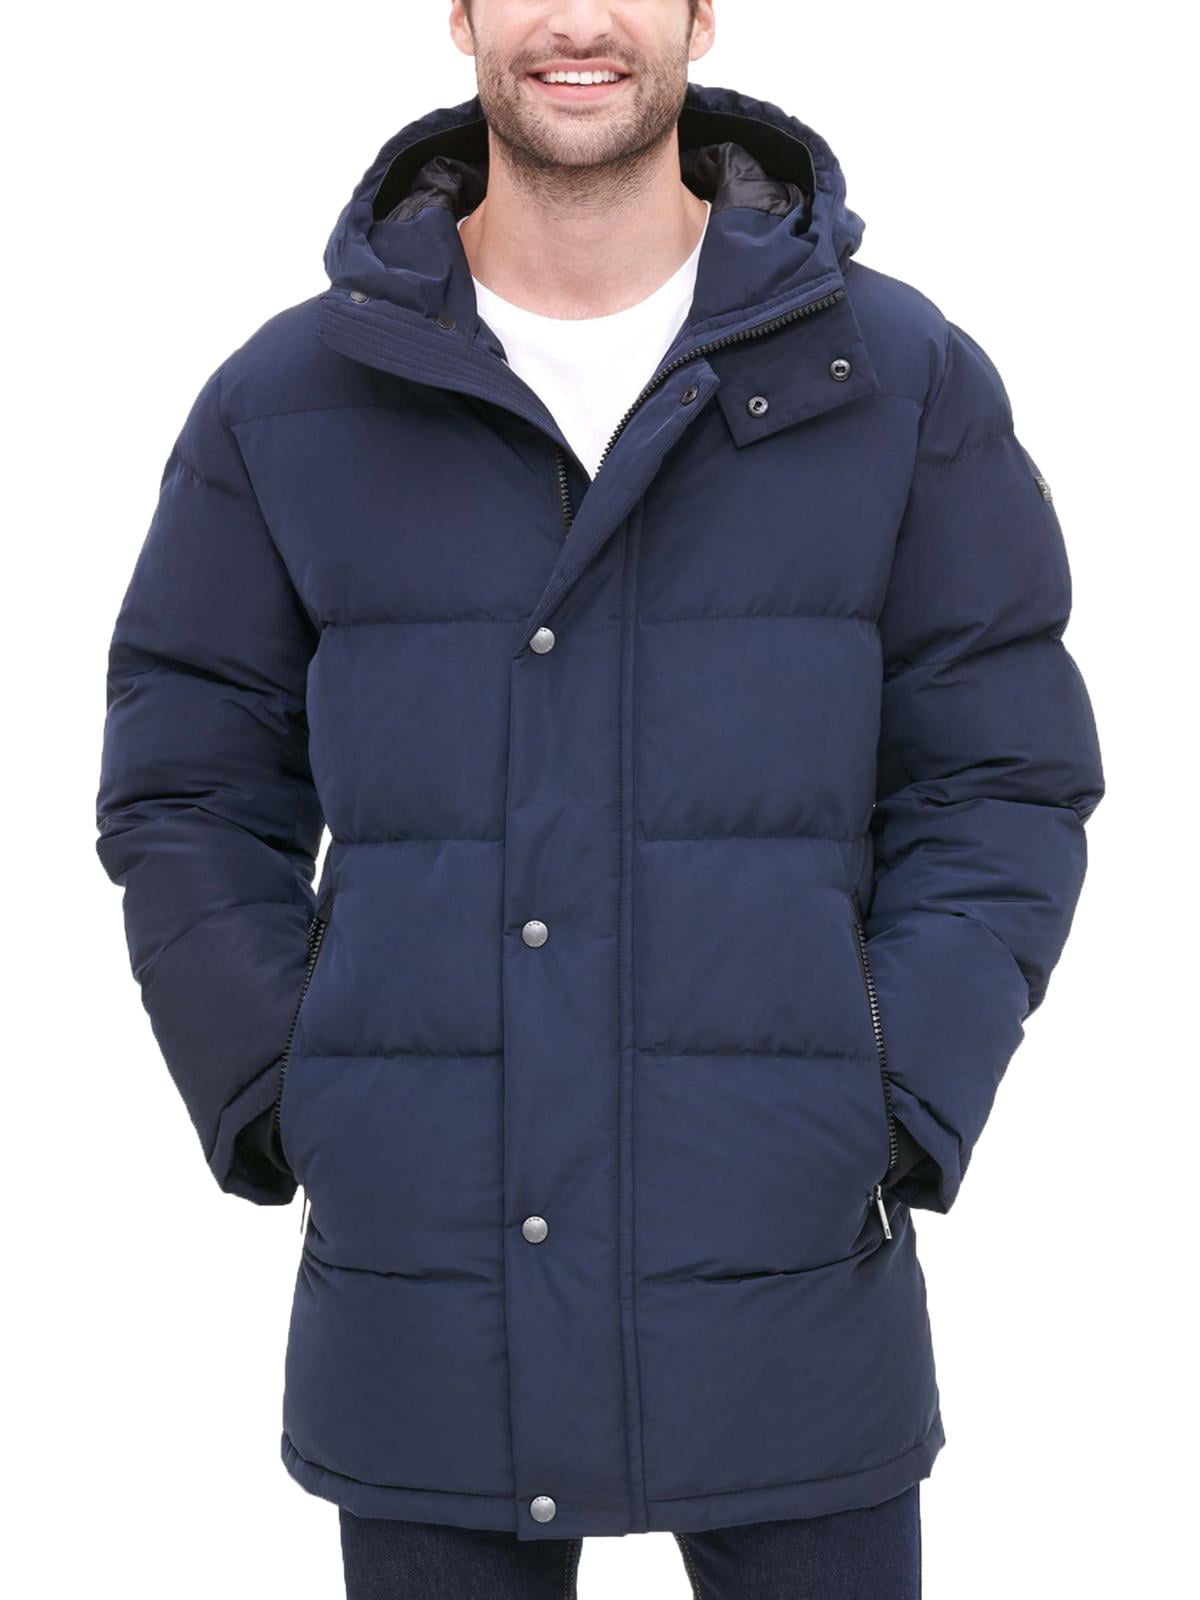 DKNY Mens Quilted Performance Hooded Bomber Jacket 